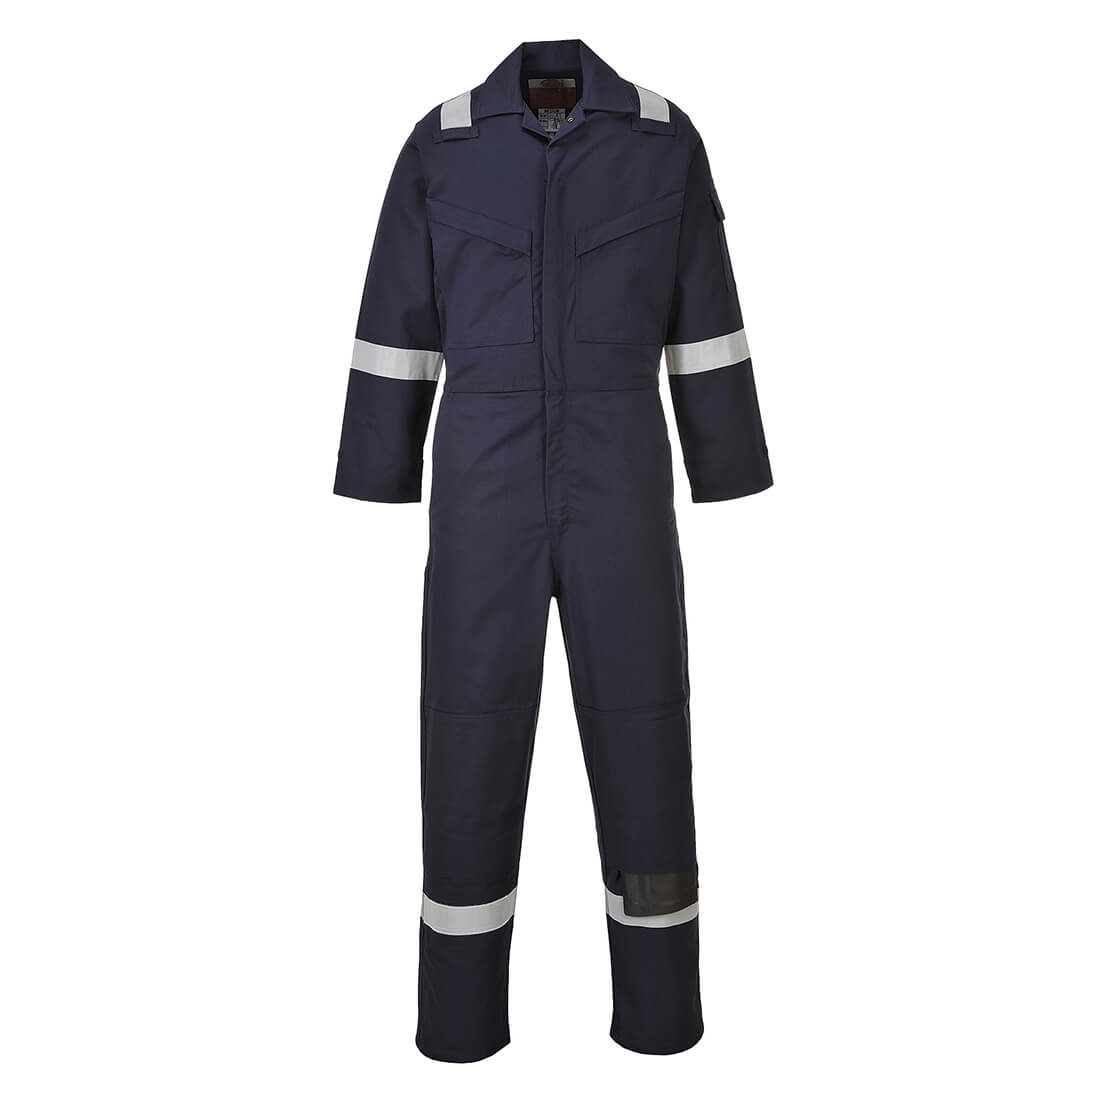 Image of Biz Flame Mens Aberdeen Flame Resistant Antistatic Coverall Navy Blue 4XL 32"